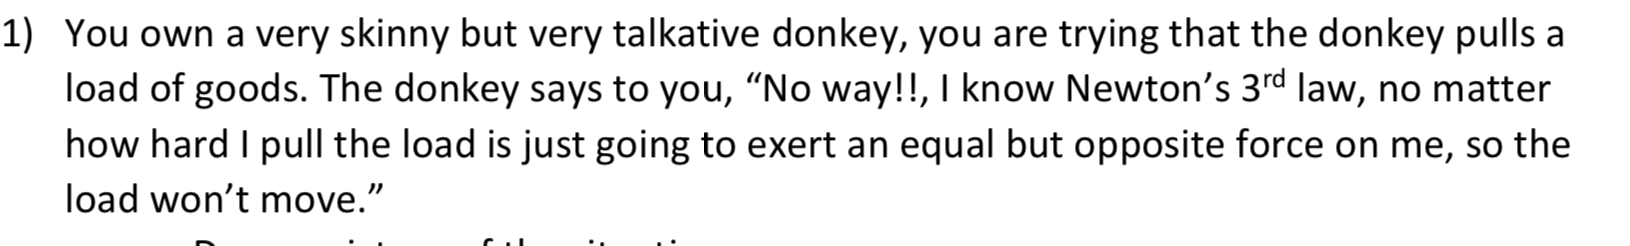 1) You own a very skinny but very talkative donkey, you are trying that the donkey pulls a
load of goods. The donkey says to you, "No way!!, I know Newton's 3rd law, no matter
how hard I pull the load is just going to exert an equal but opposite force on me, so the
load won't move."
